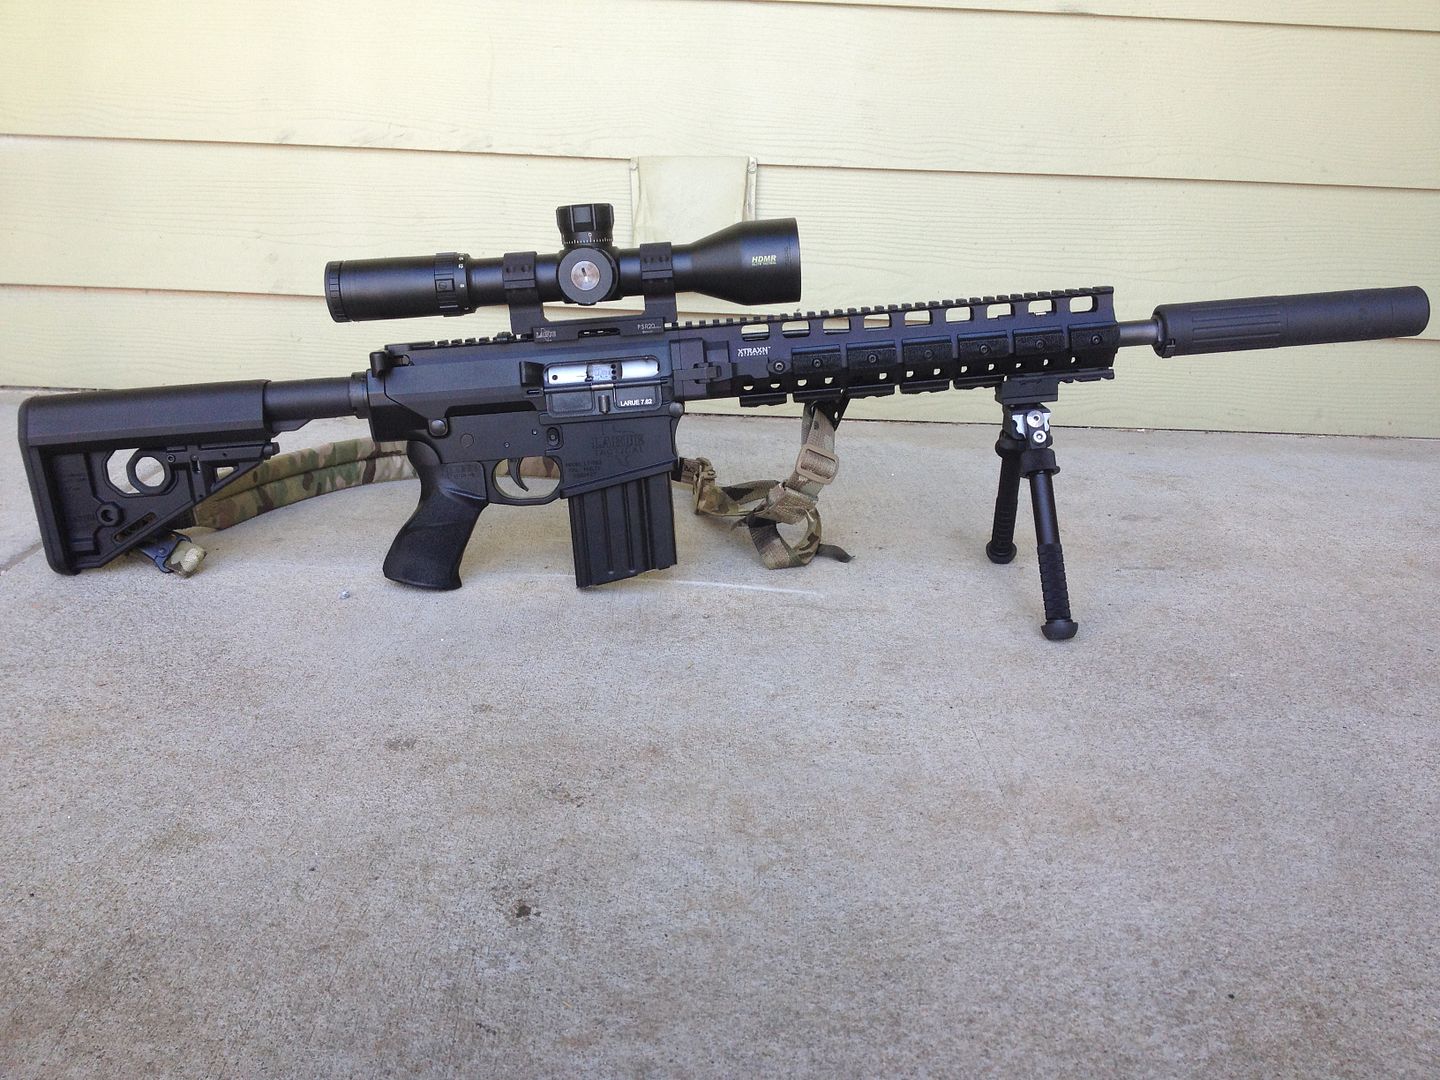 Suppressed Rifles Picture Thread - Page 43 - AR15.COM